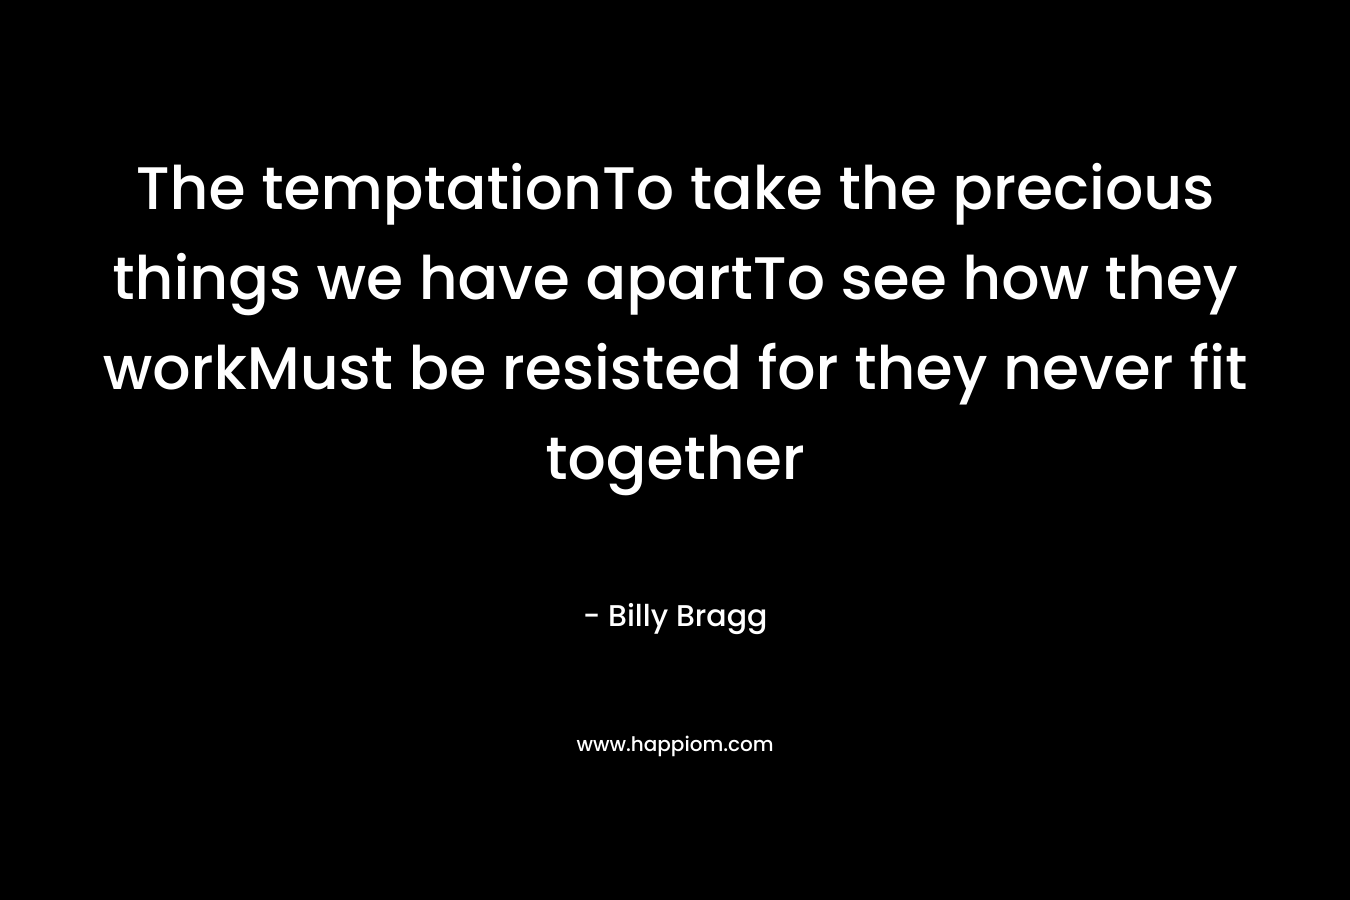 The temptationTo take the precious things we have apartTo see how they workMust be resisted for they never fit together  – Billy Bragg